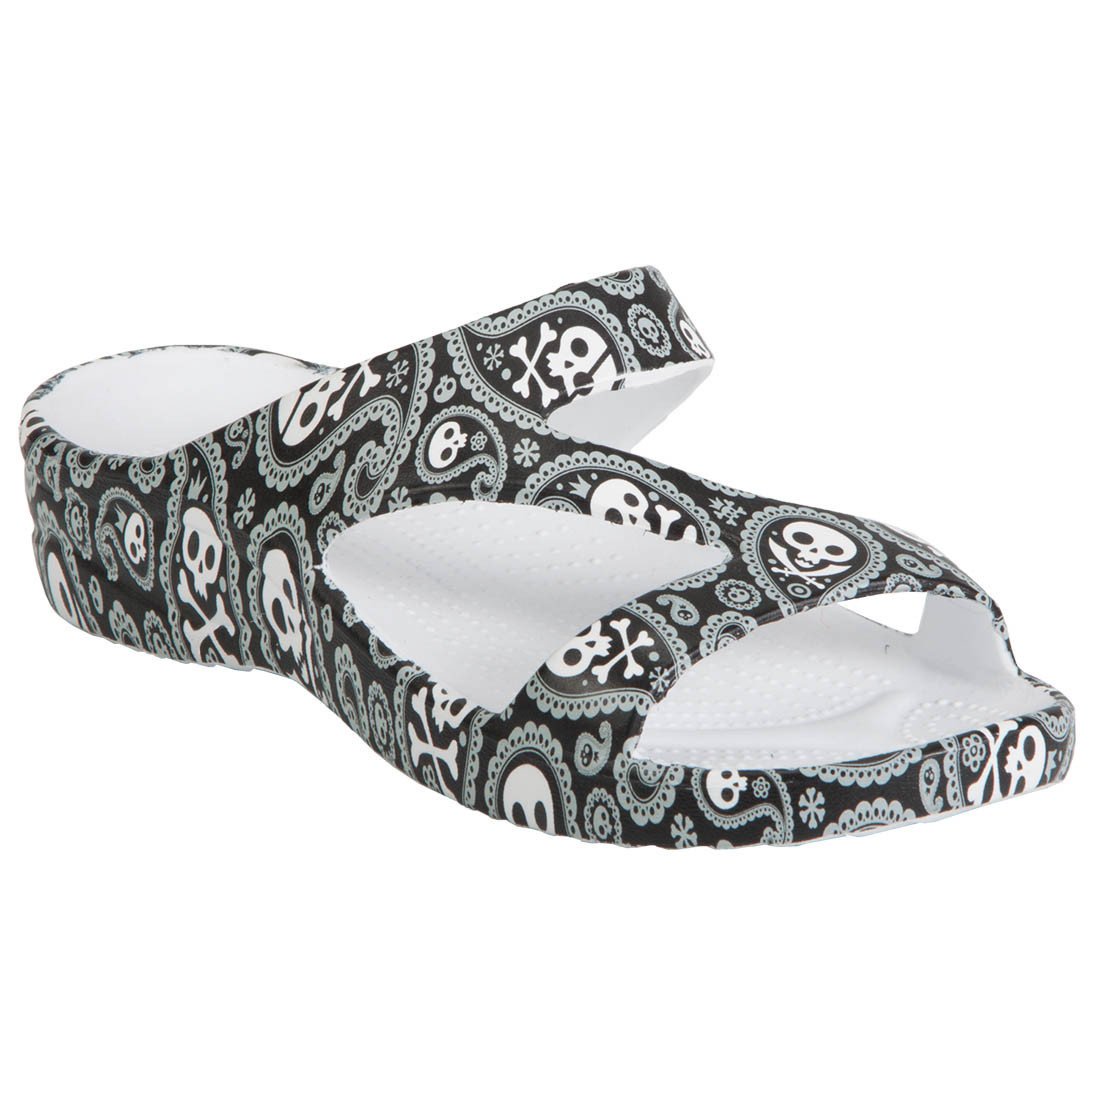 Women's Loudmouth Z Sandals - Shiver Me Timbers